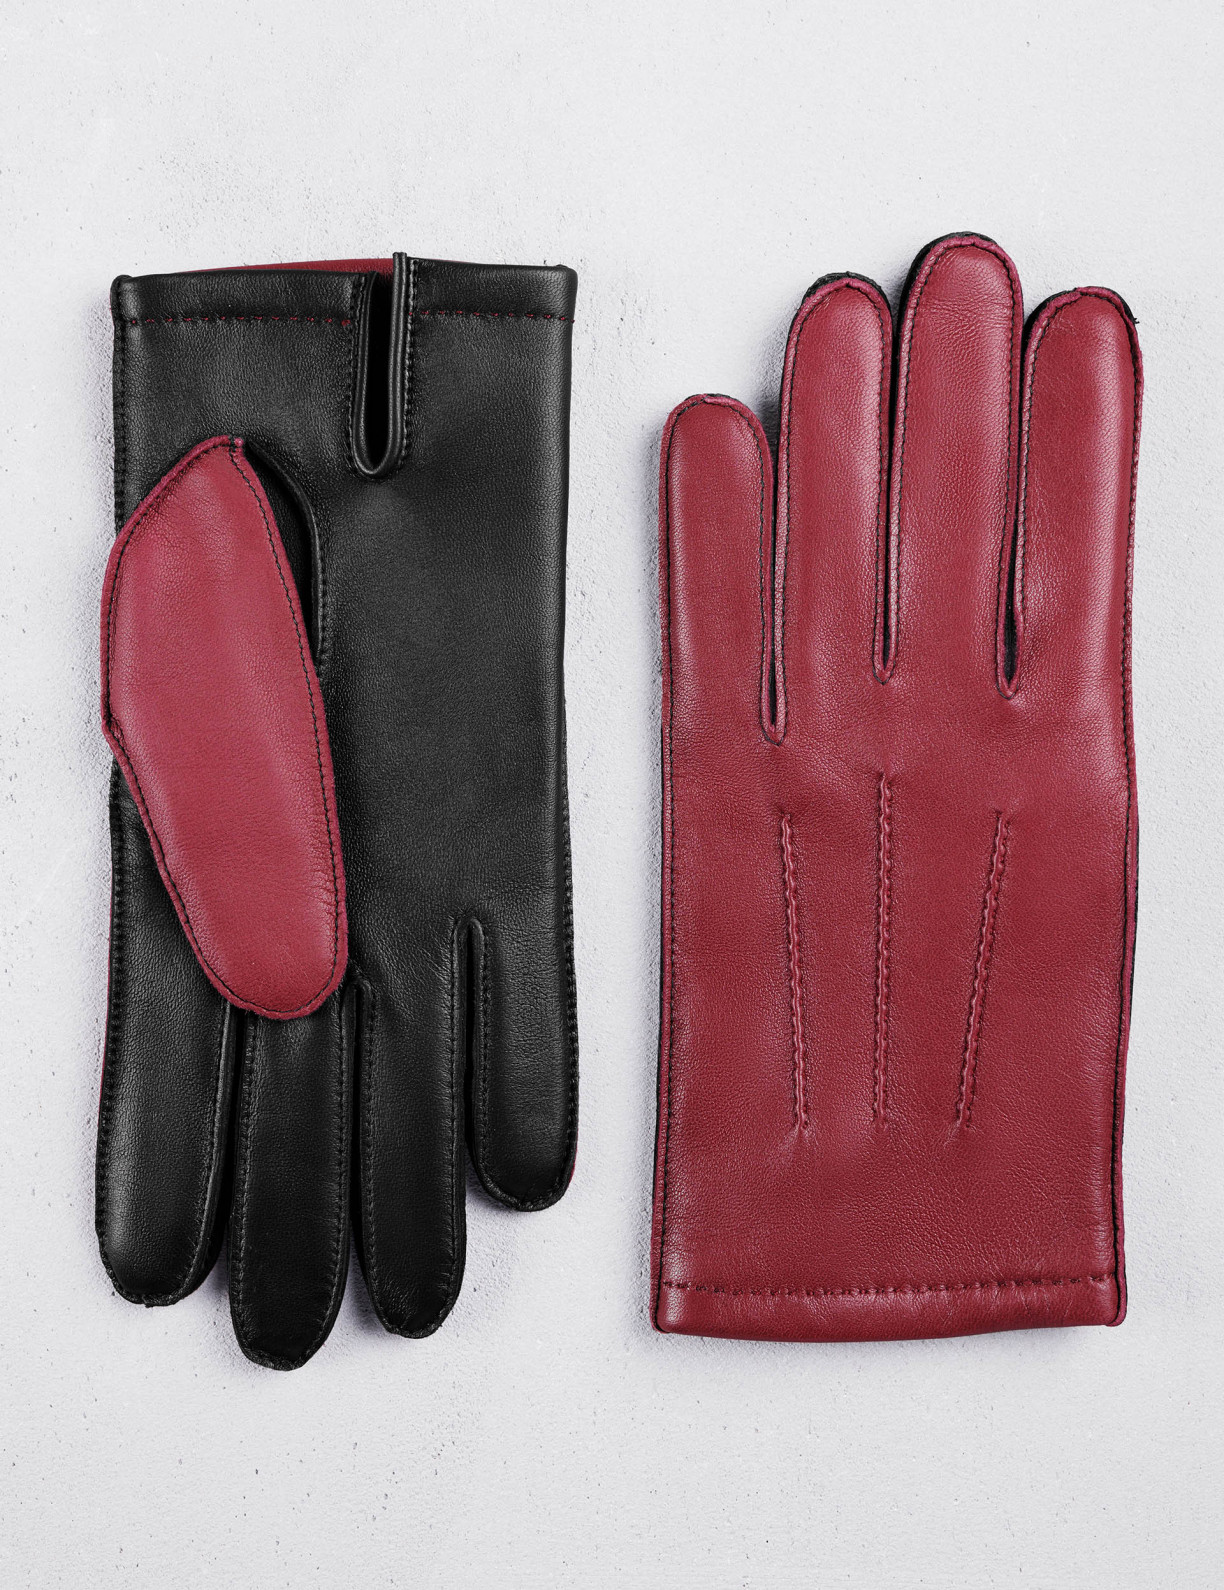 Men\'s touchscreen gloves with stitching|Camille Fournet